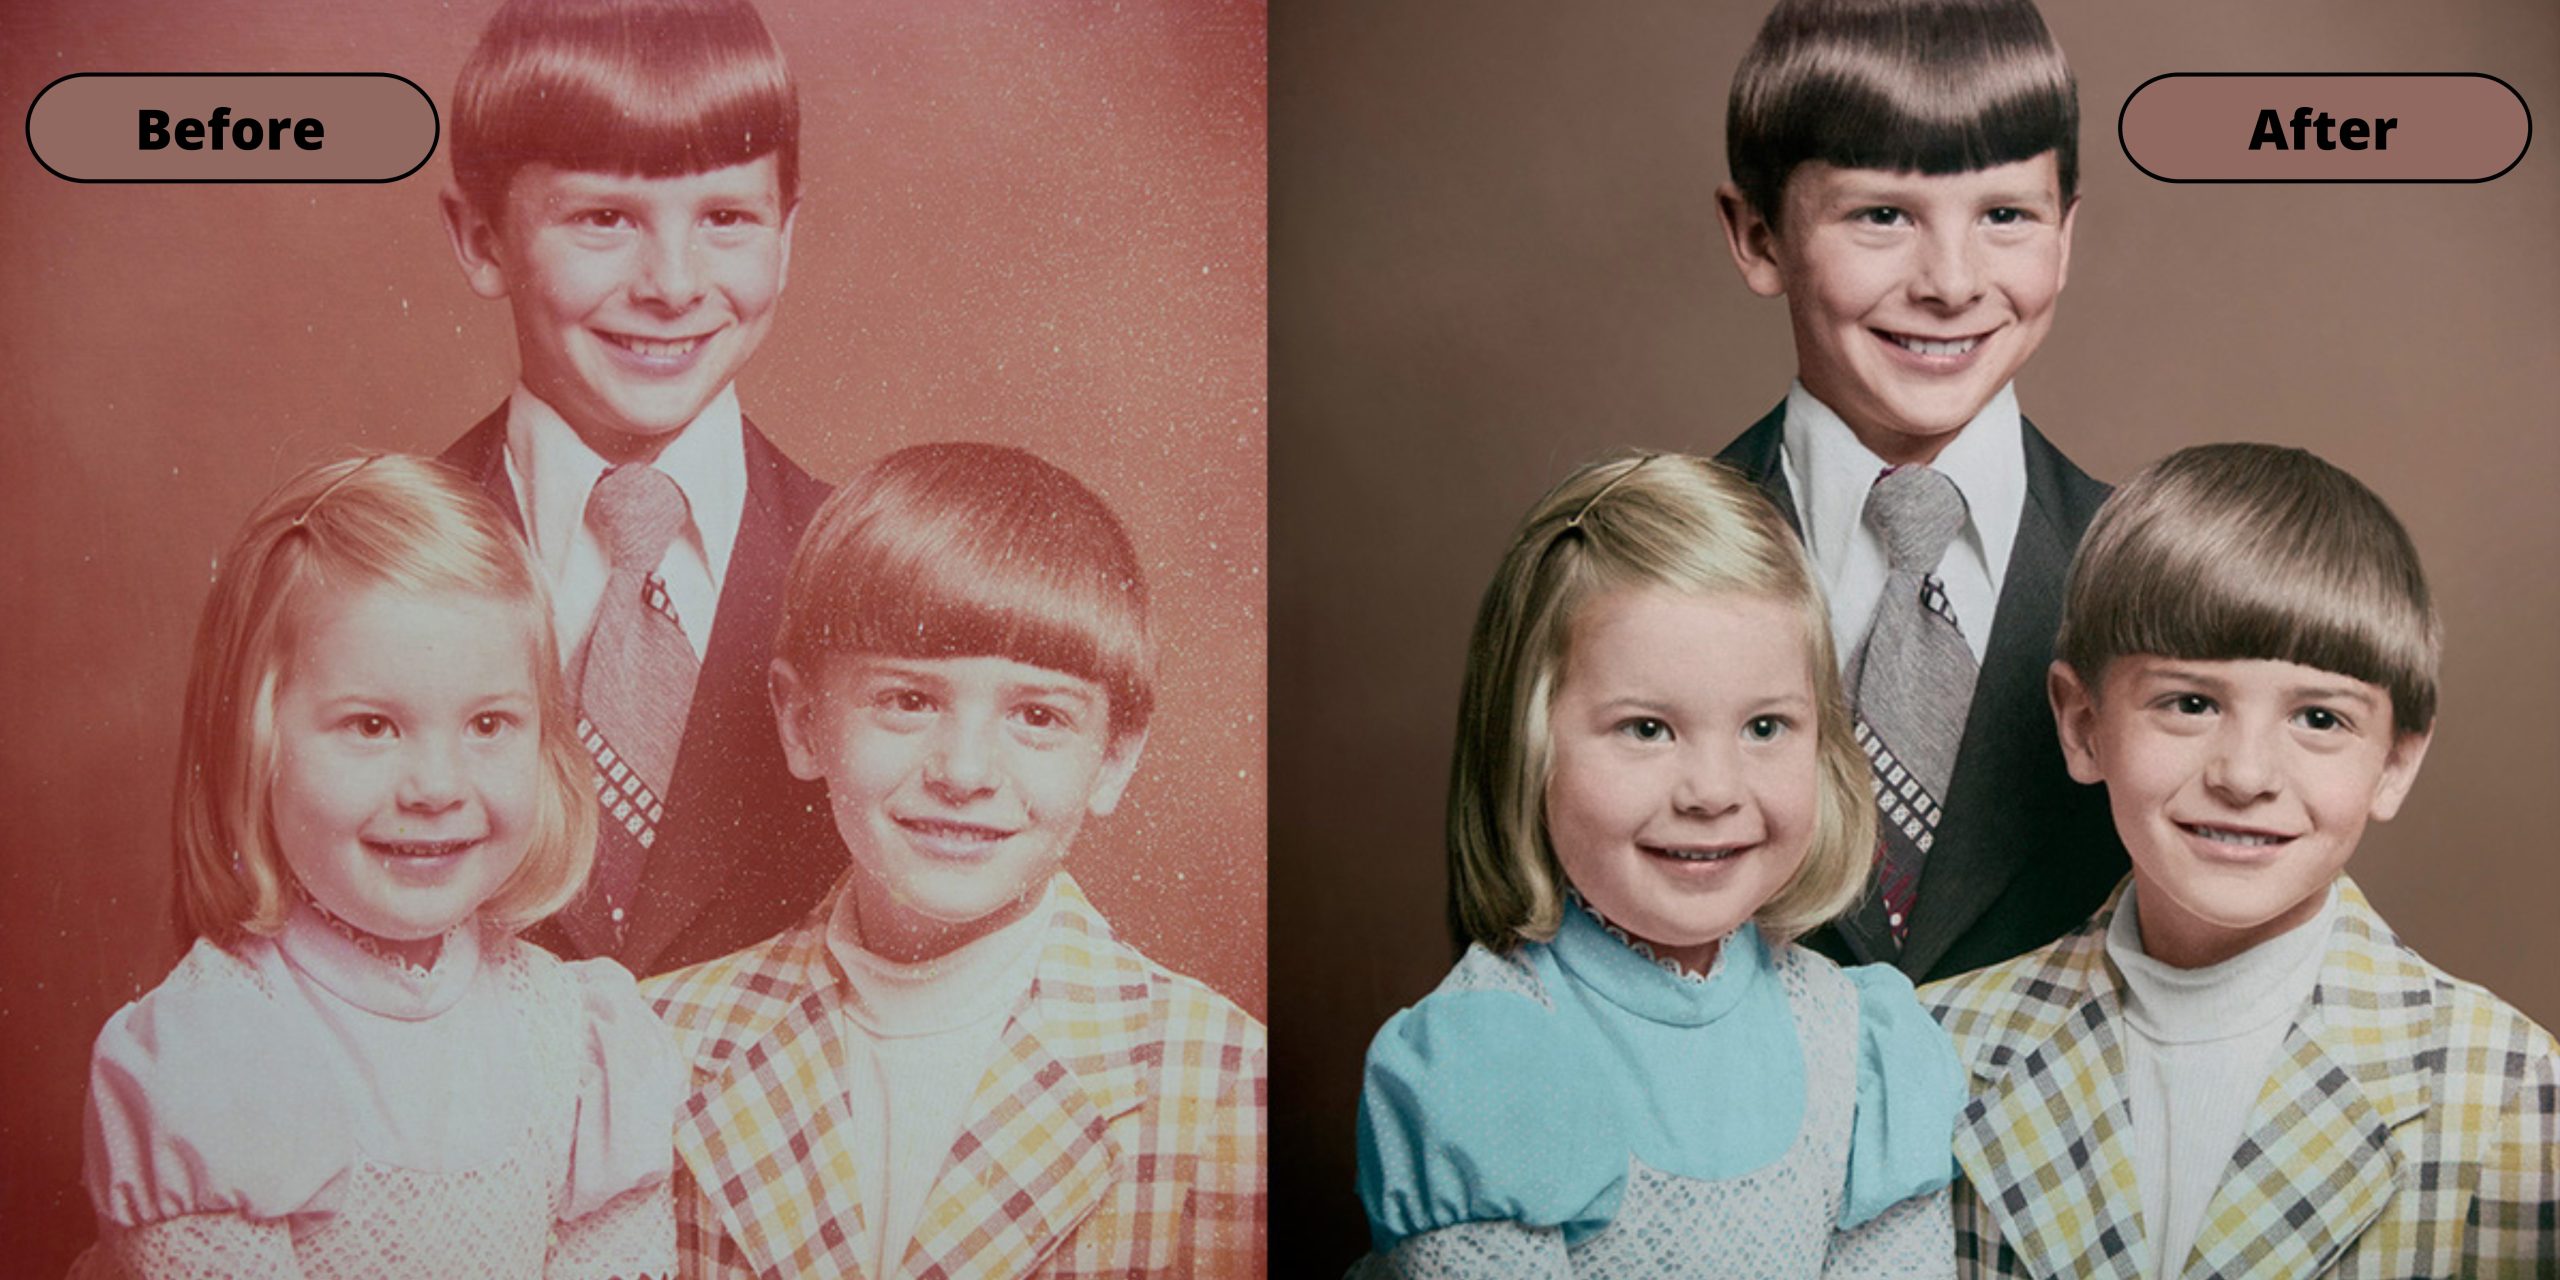 8 Photo Restoration Service That Can Make a Difference